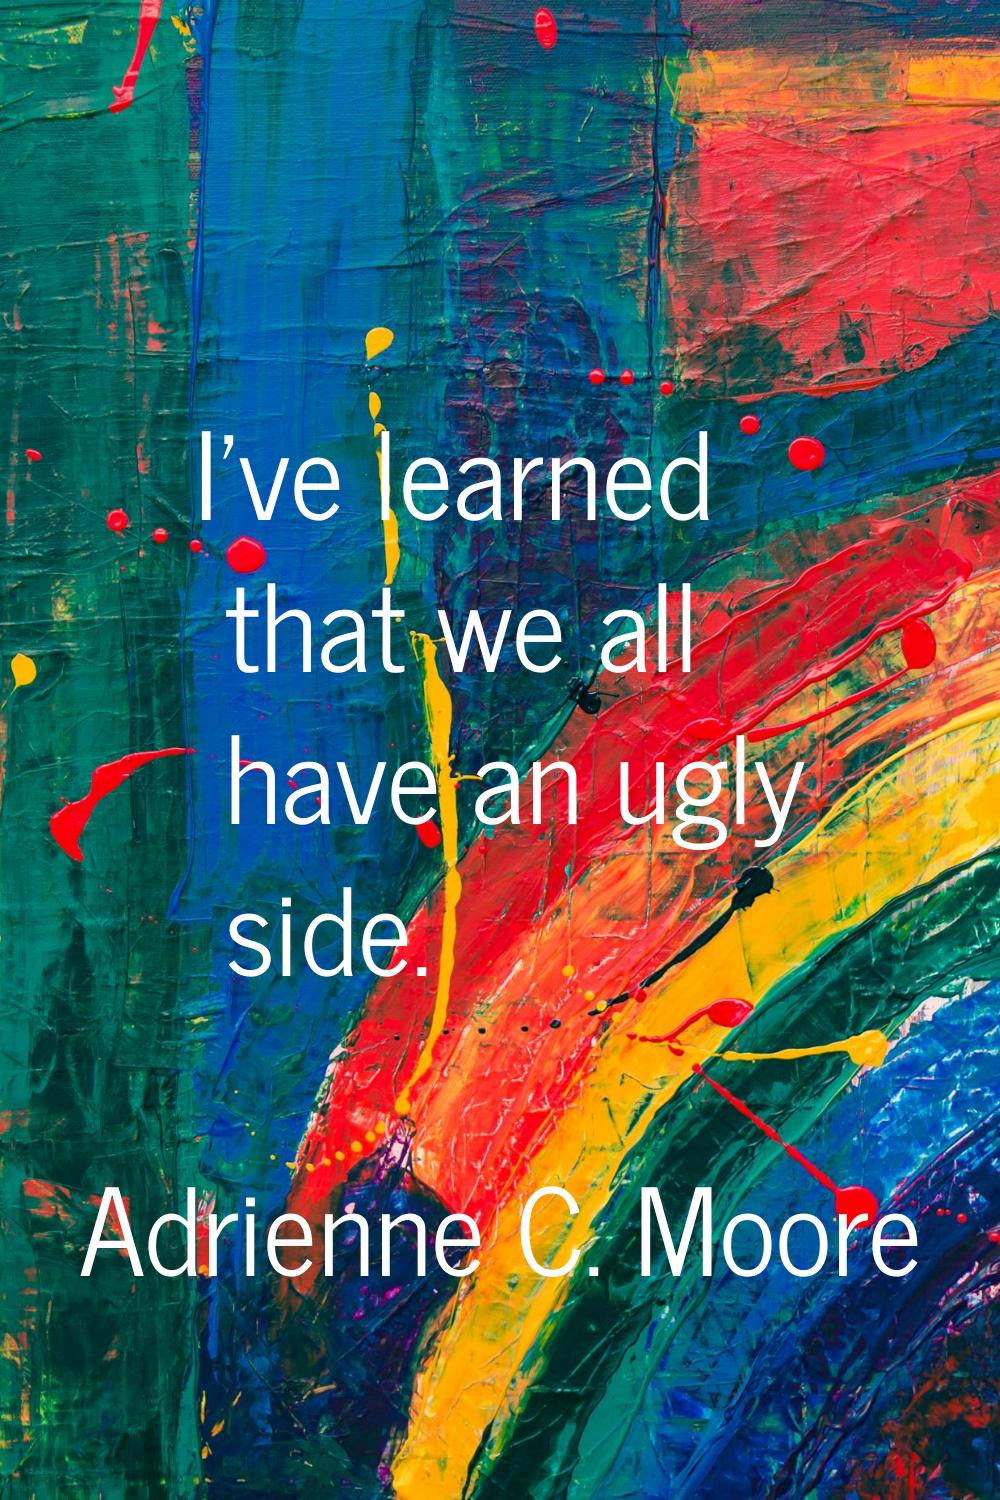 I've learned that we all have an ugly side.